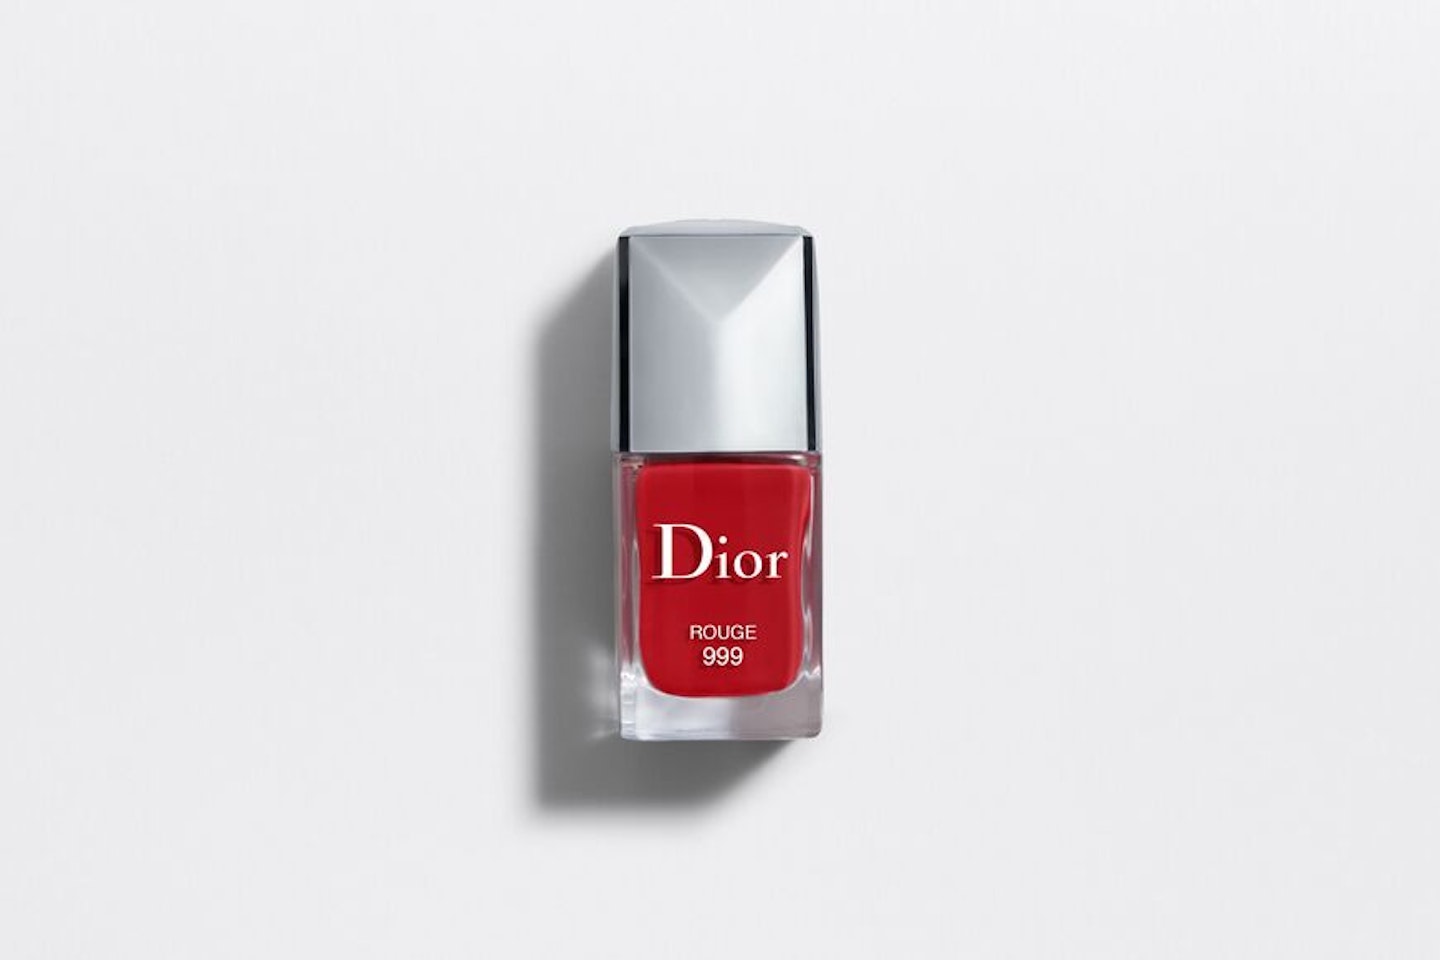 Dior Vernis in Rouge 999, £22